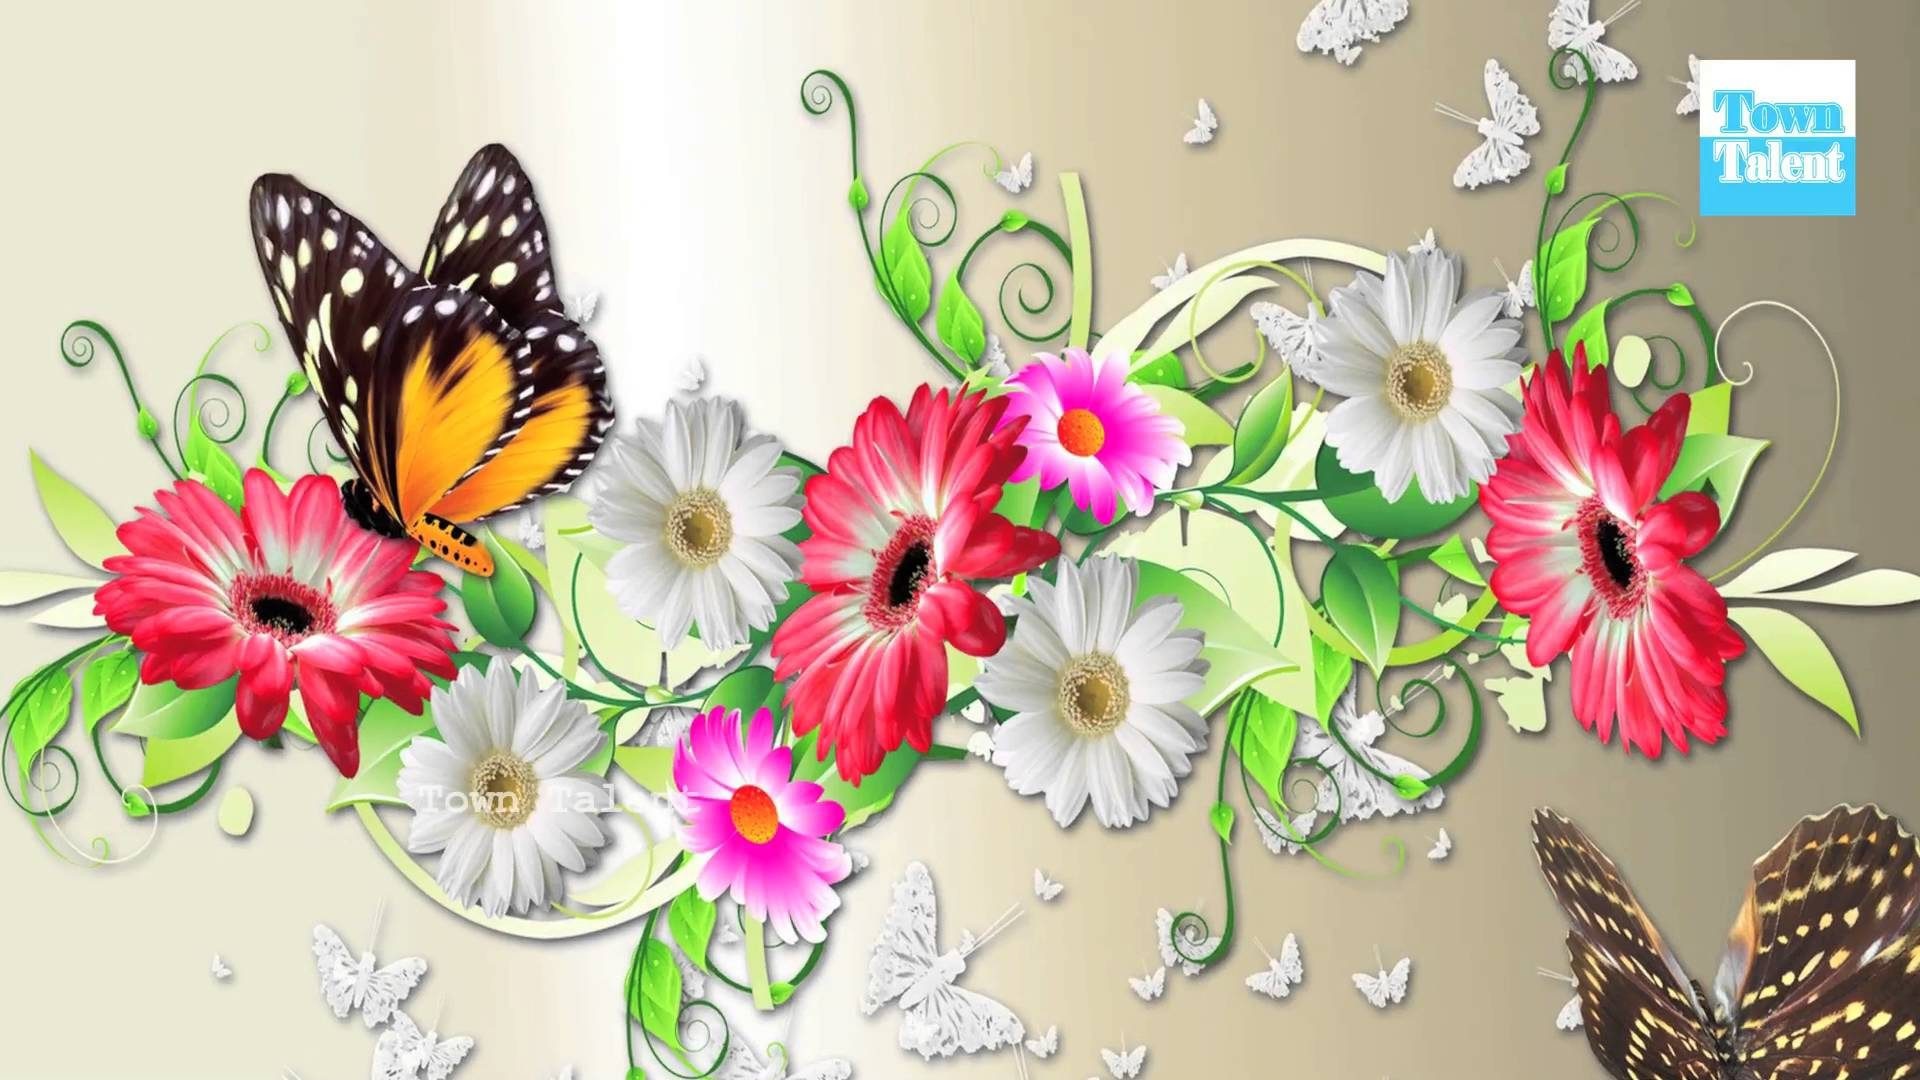 Differet flowers and beautiful butterfly wallpaper